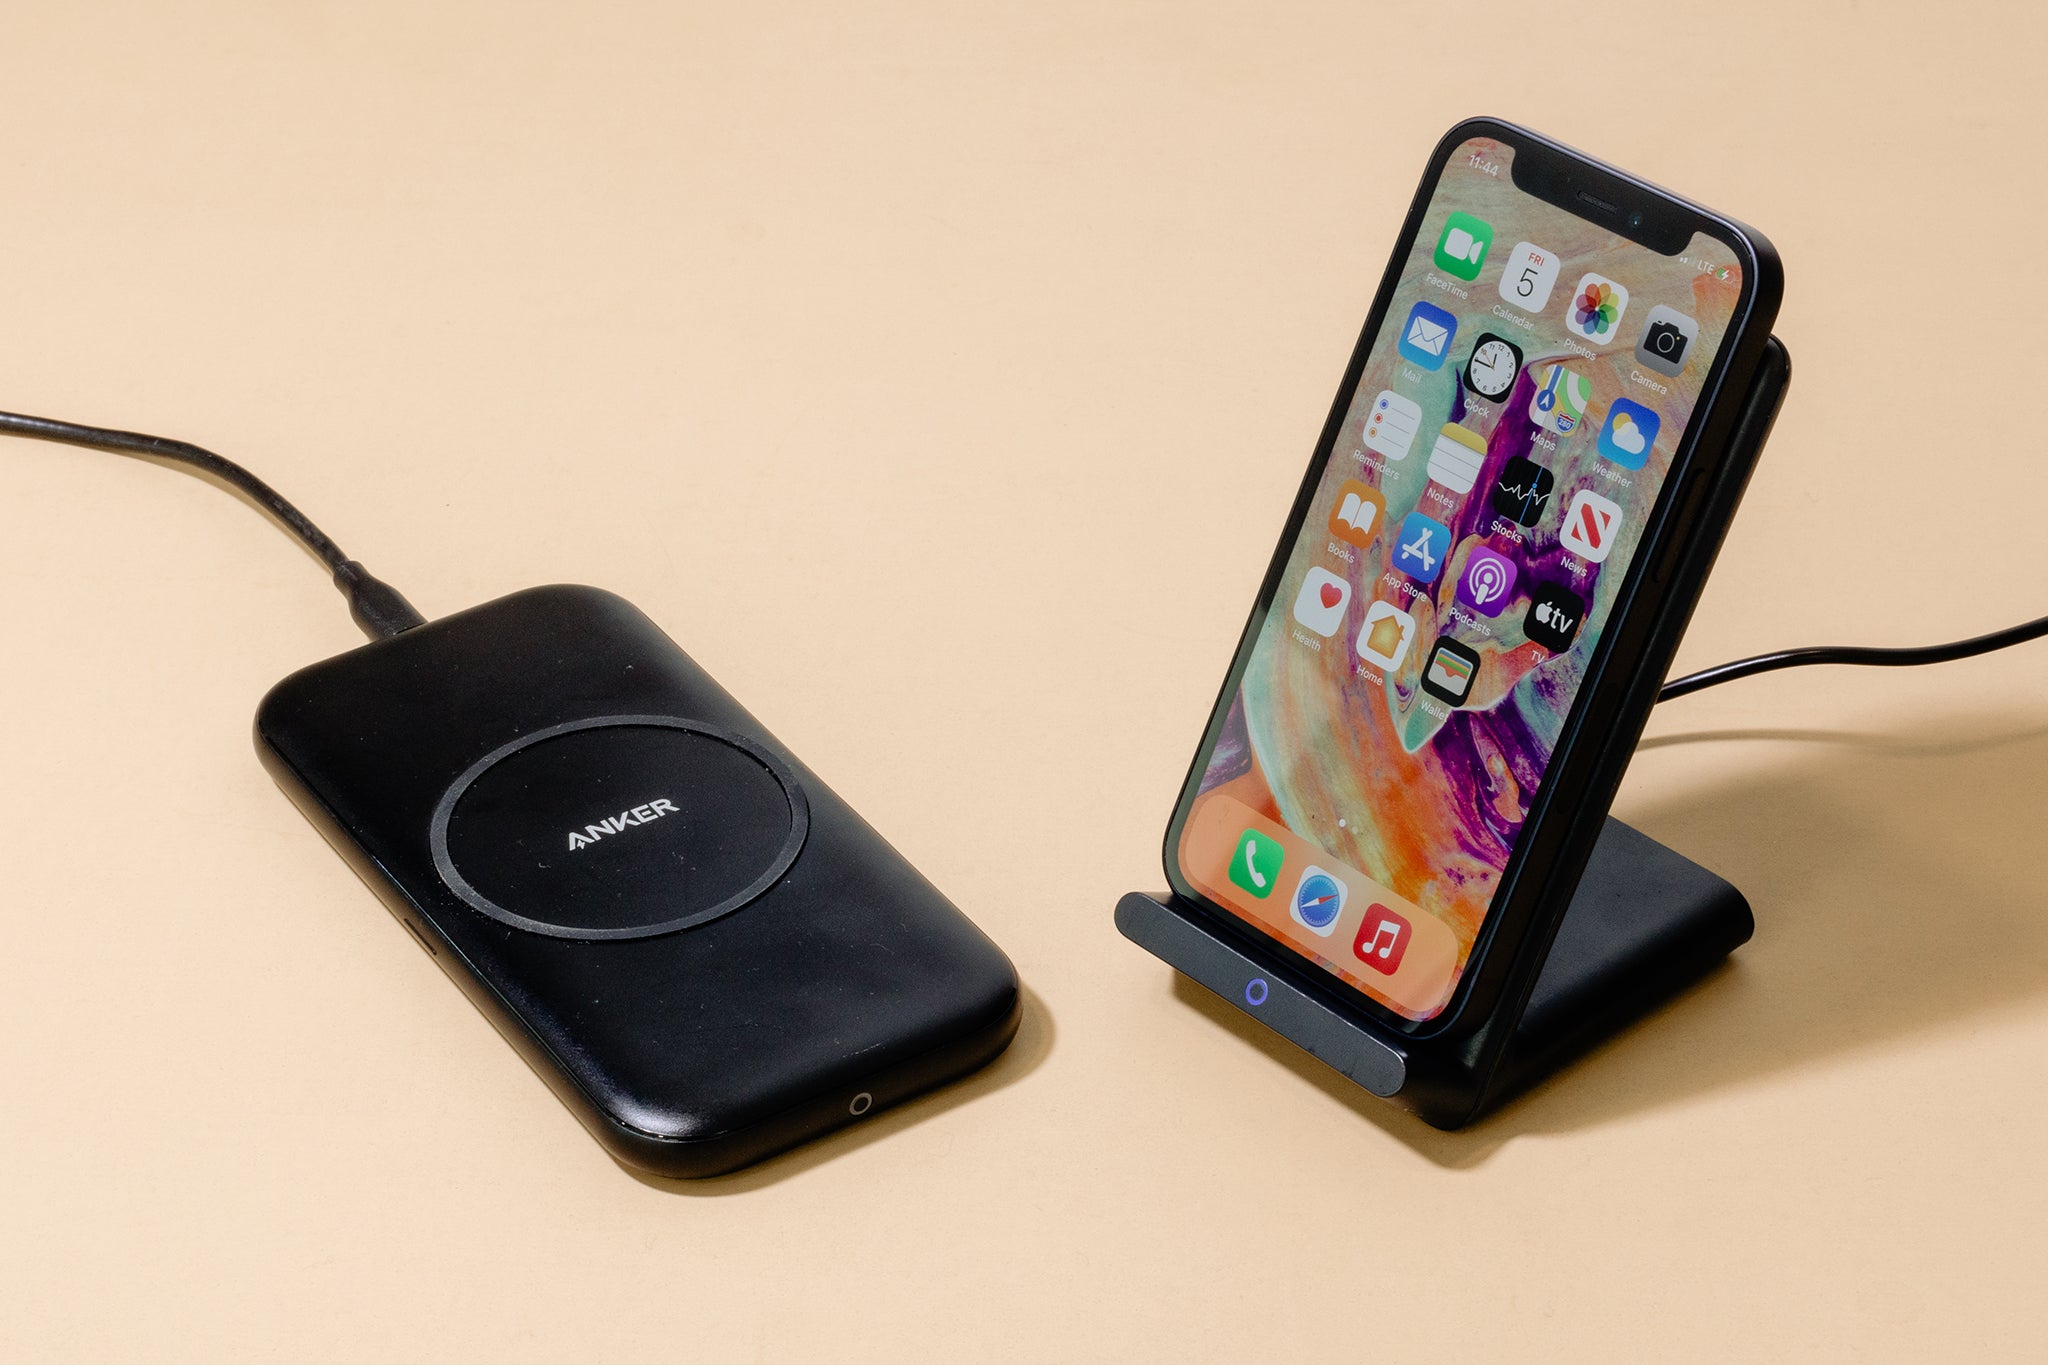 energous-is-finally-bringing-its-wireless-charging-tech-to-market